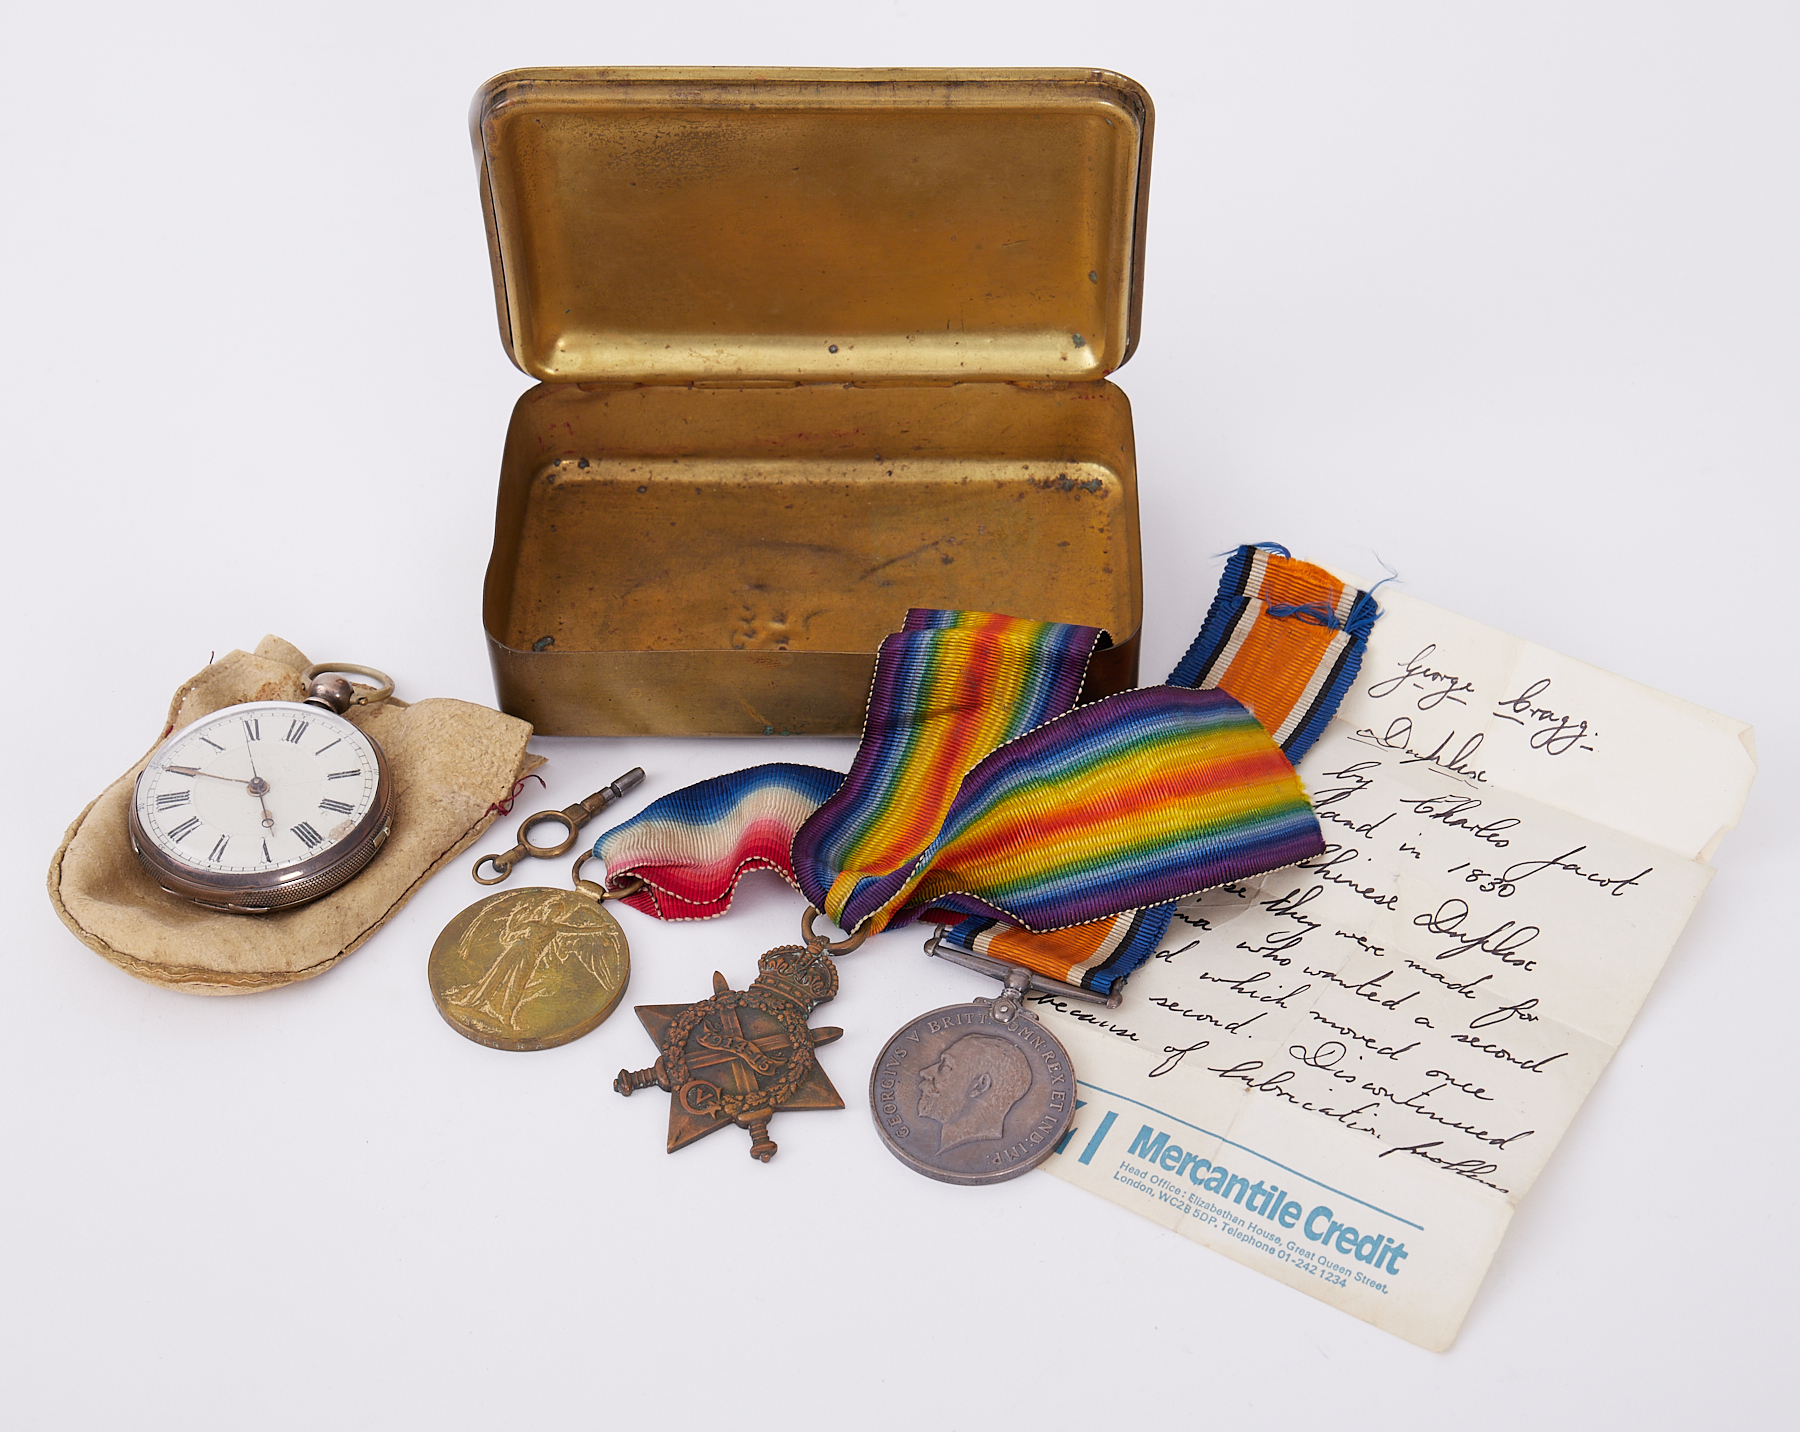 Three Great War medals awarded to 416 PTE.E.CRAGG.R.A.M.C., Mary Tin also a pocket watch. - Image 2 of 2